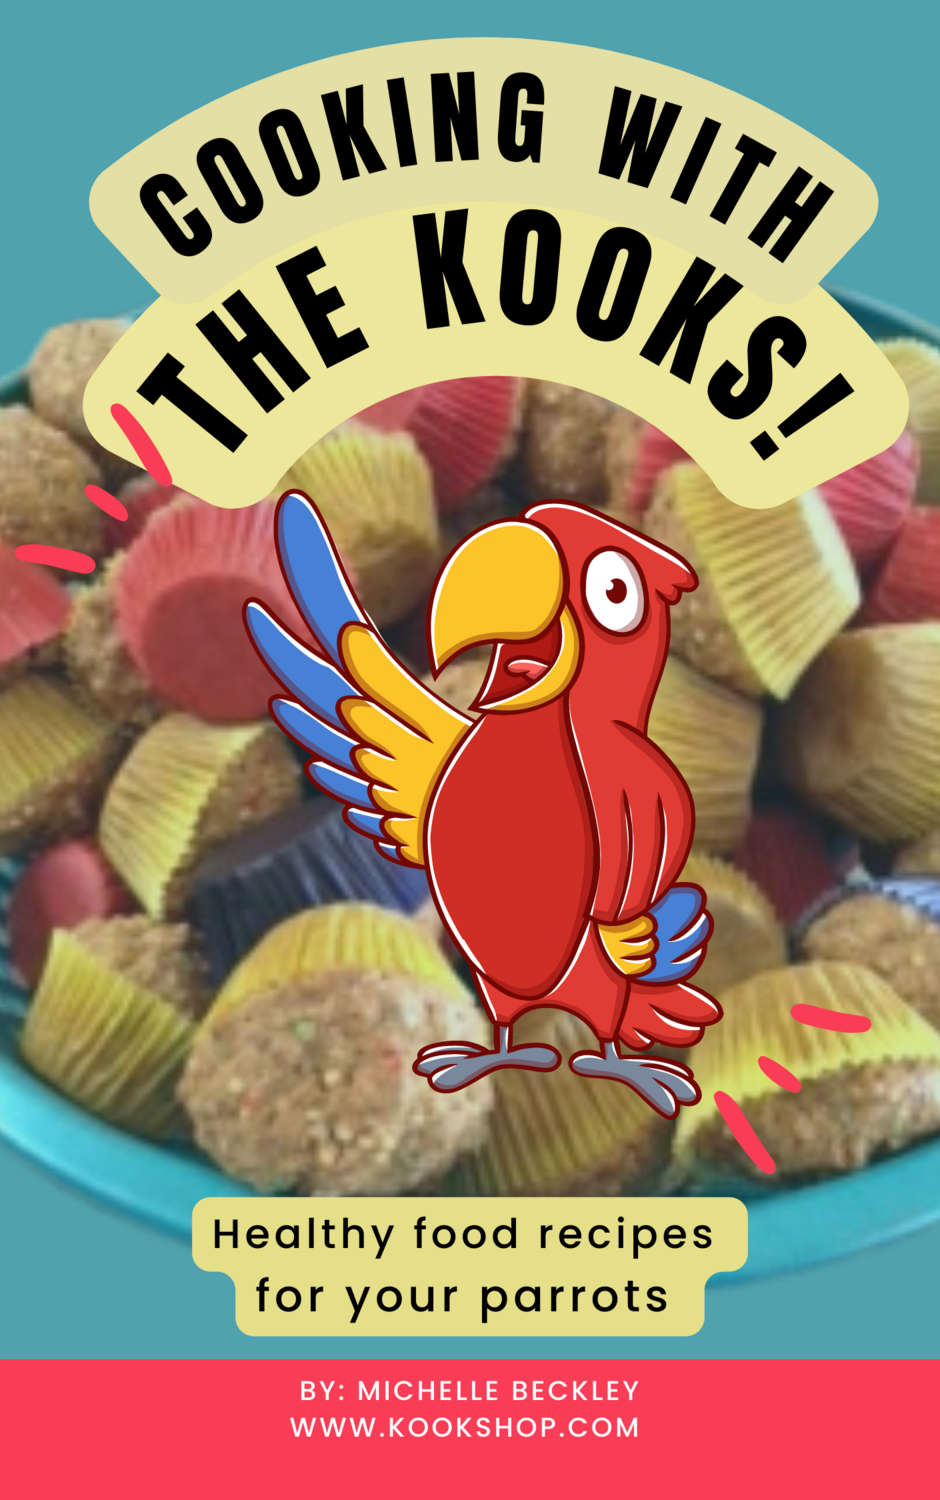 Cooking with the Kooks - Healthy Food Recipes for Your Parrots!